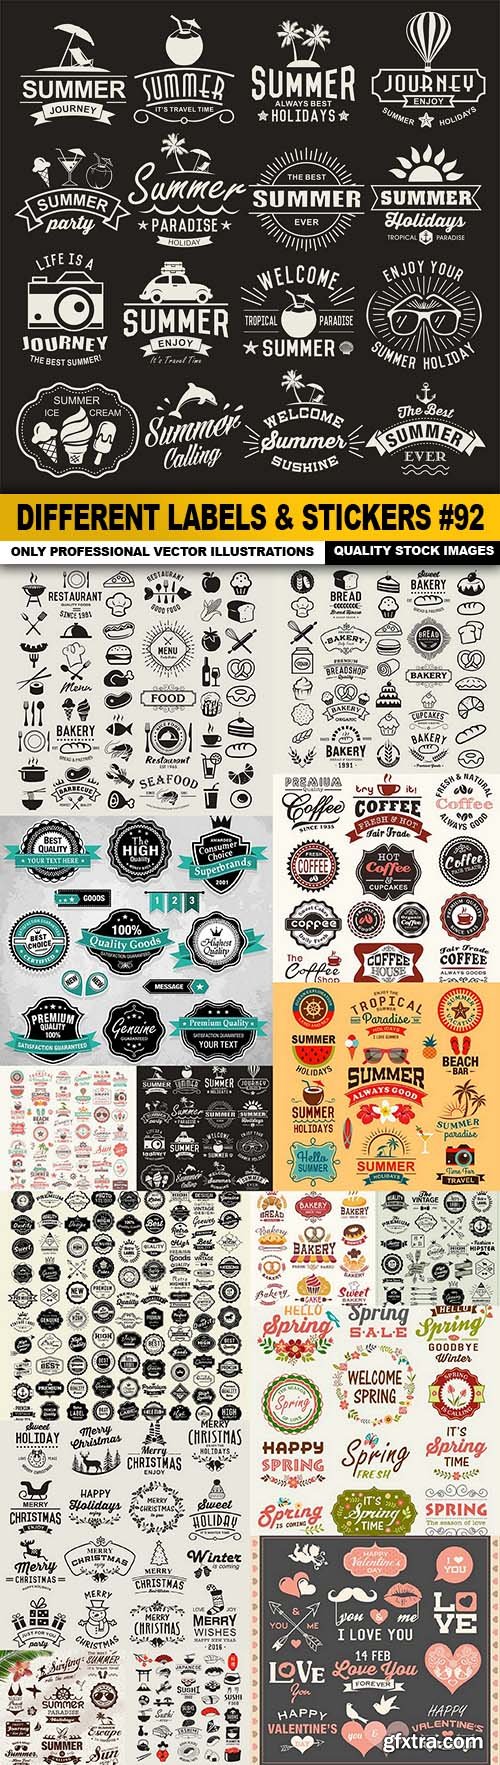 Different Labels & Stickers #92 - 15 Vector